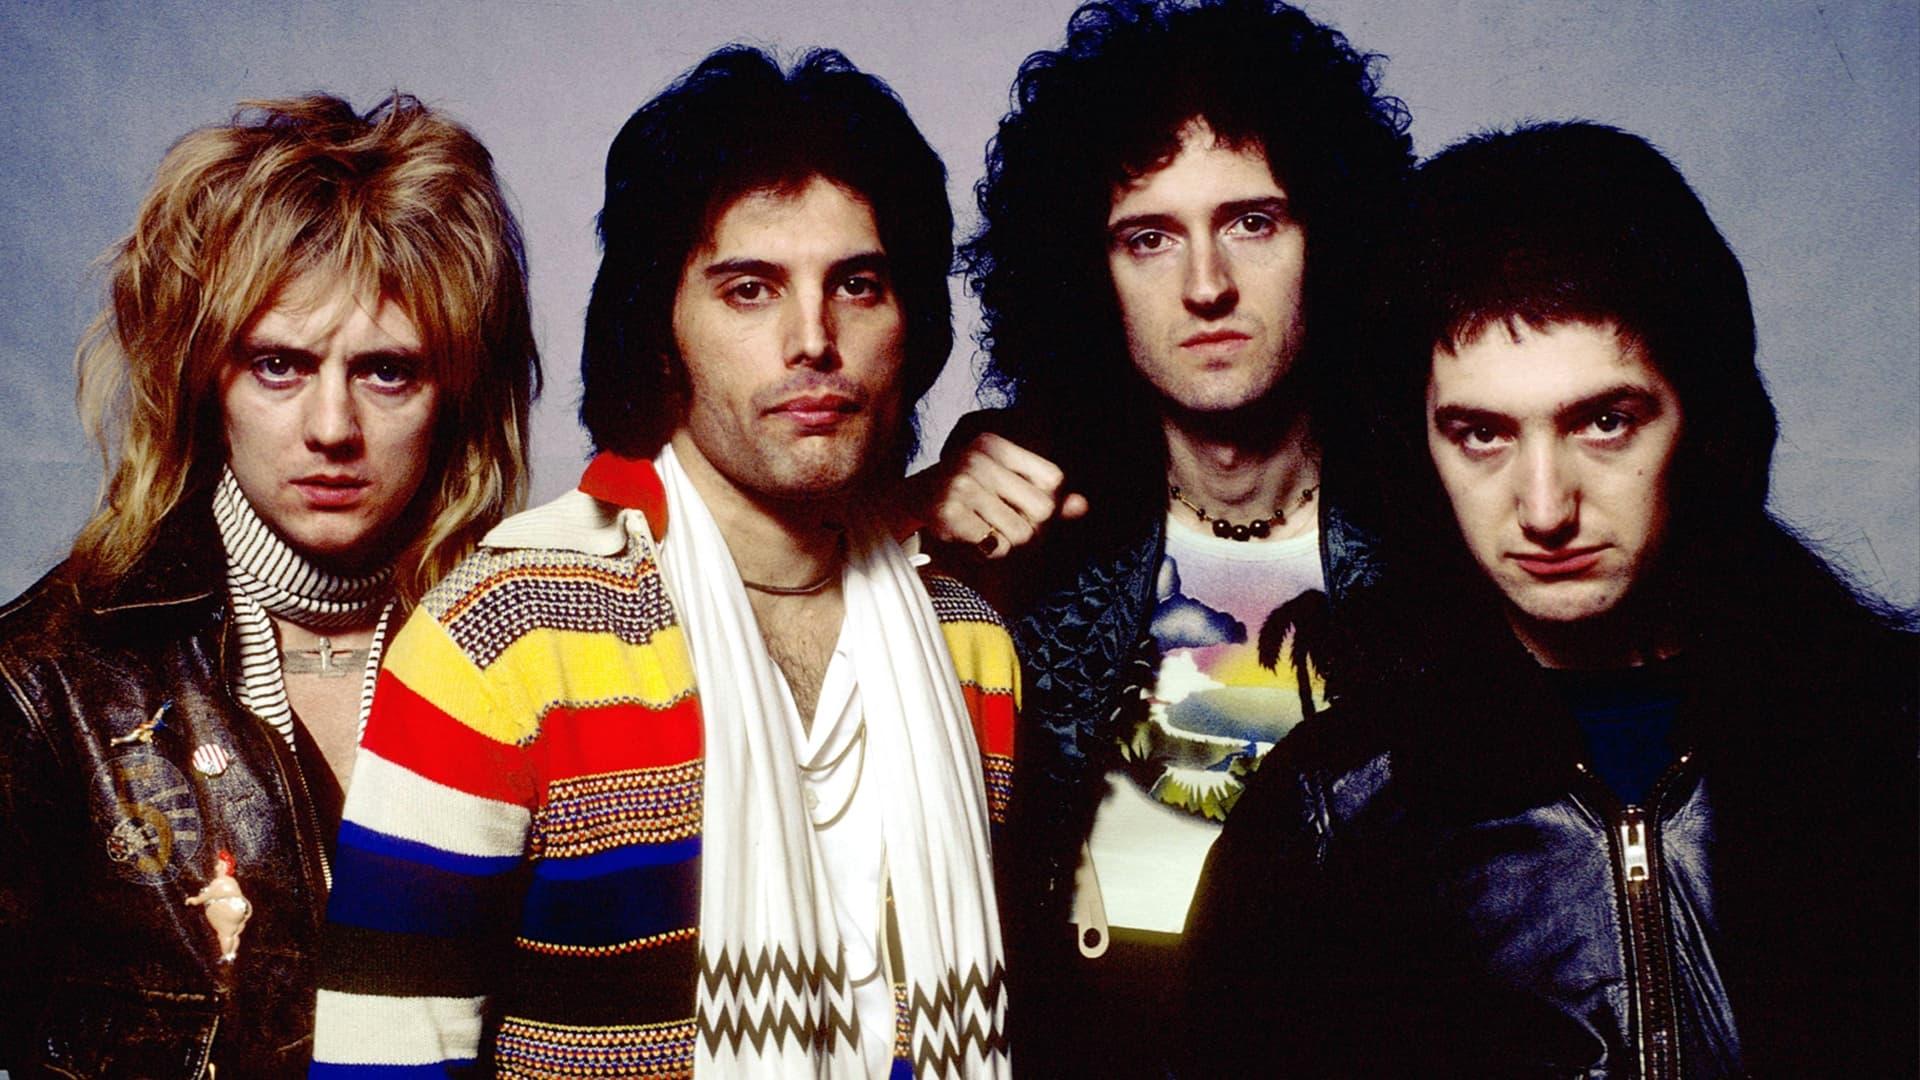 QUEEN - News Of The World [40th Anniversary] backdrop